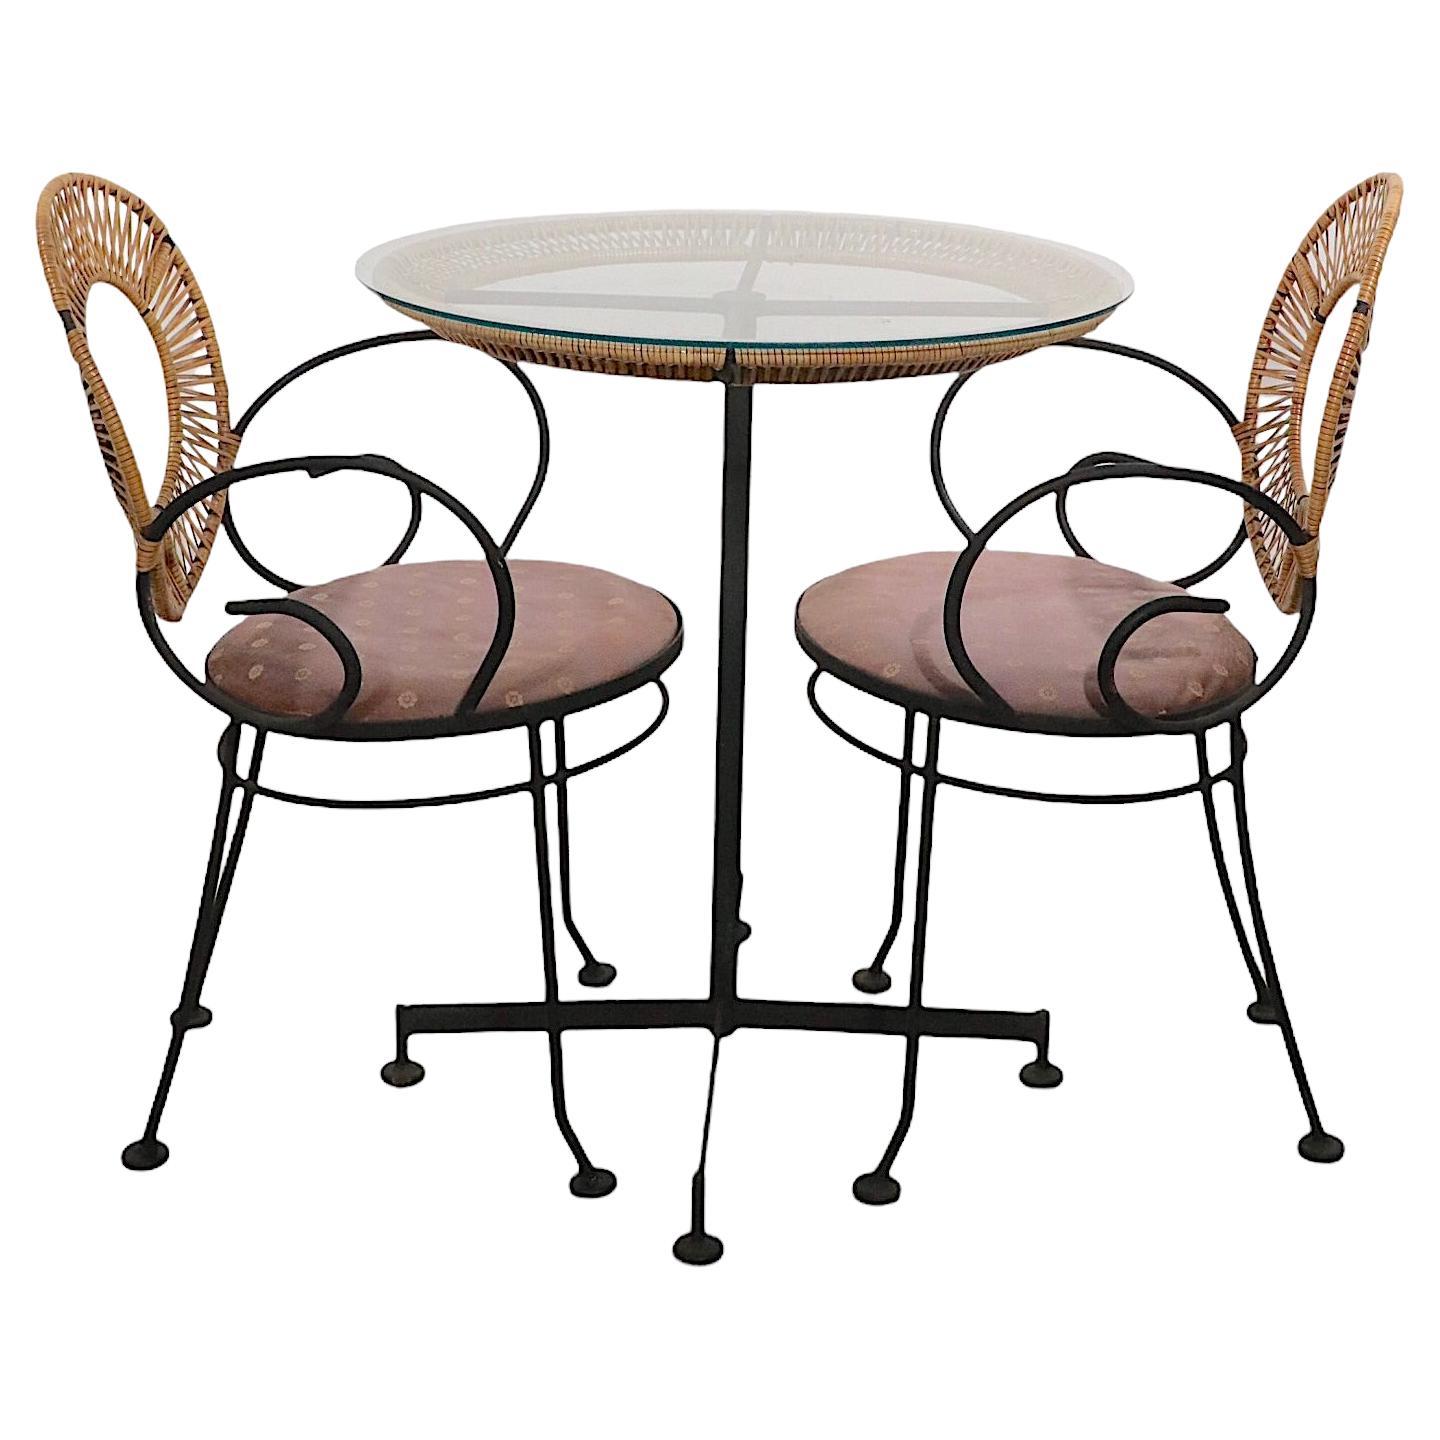 What is a dinette set?